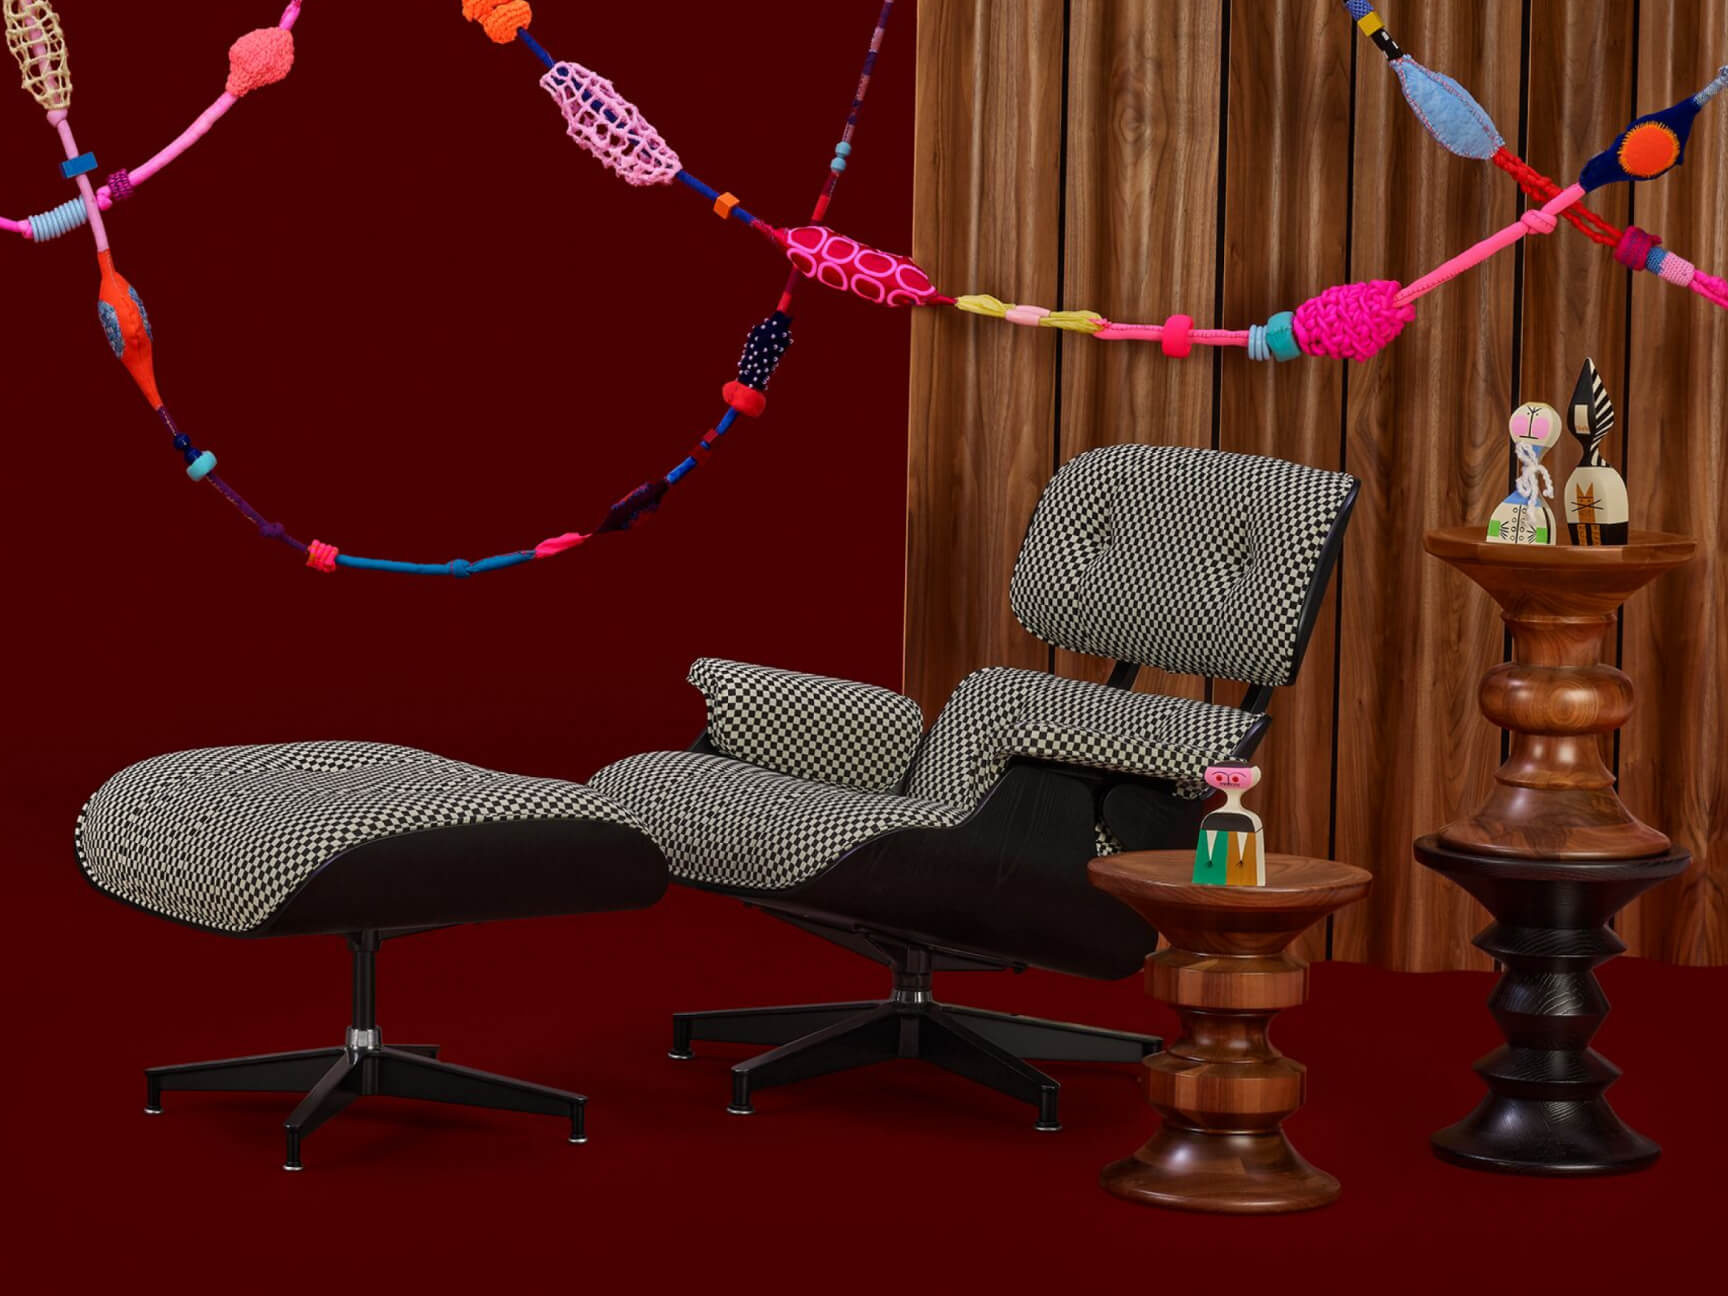 An Eames Lounge Chair and Ottoman is featured below colorful streamers with Eames Turned Stools and Girard Wooden Dolls next to it.